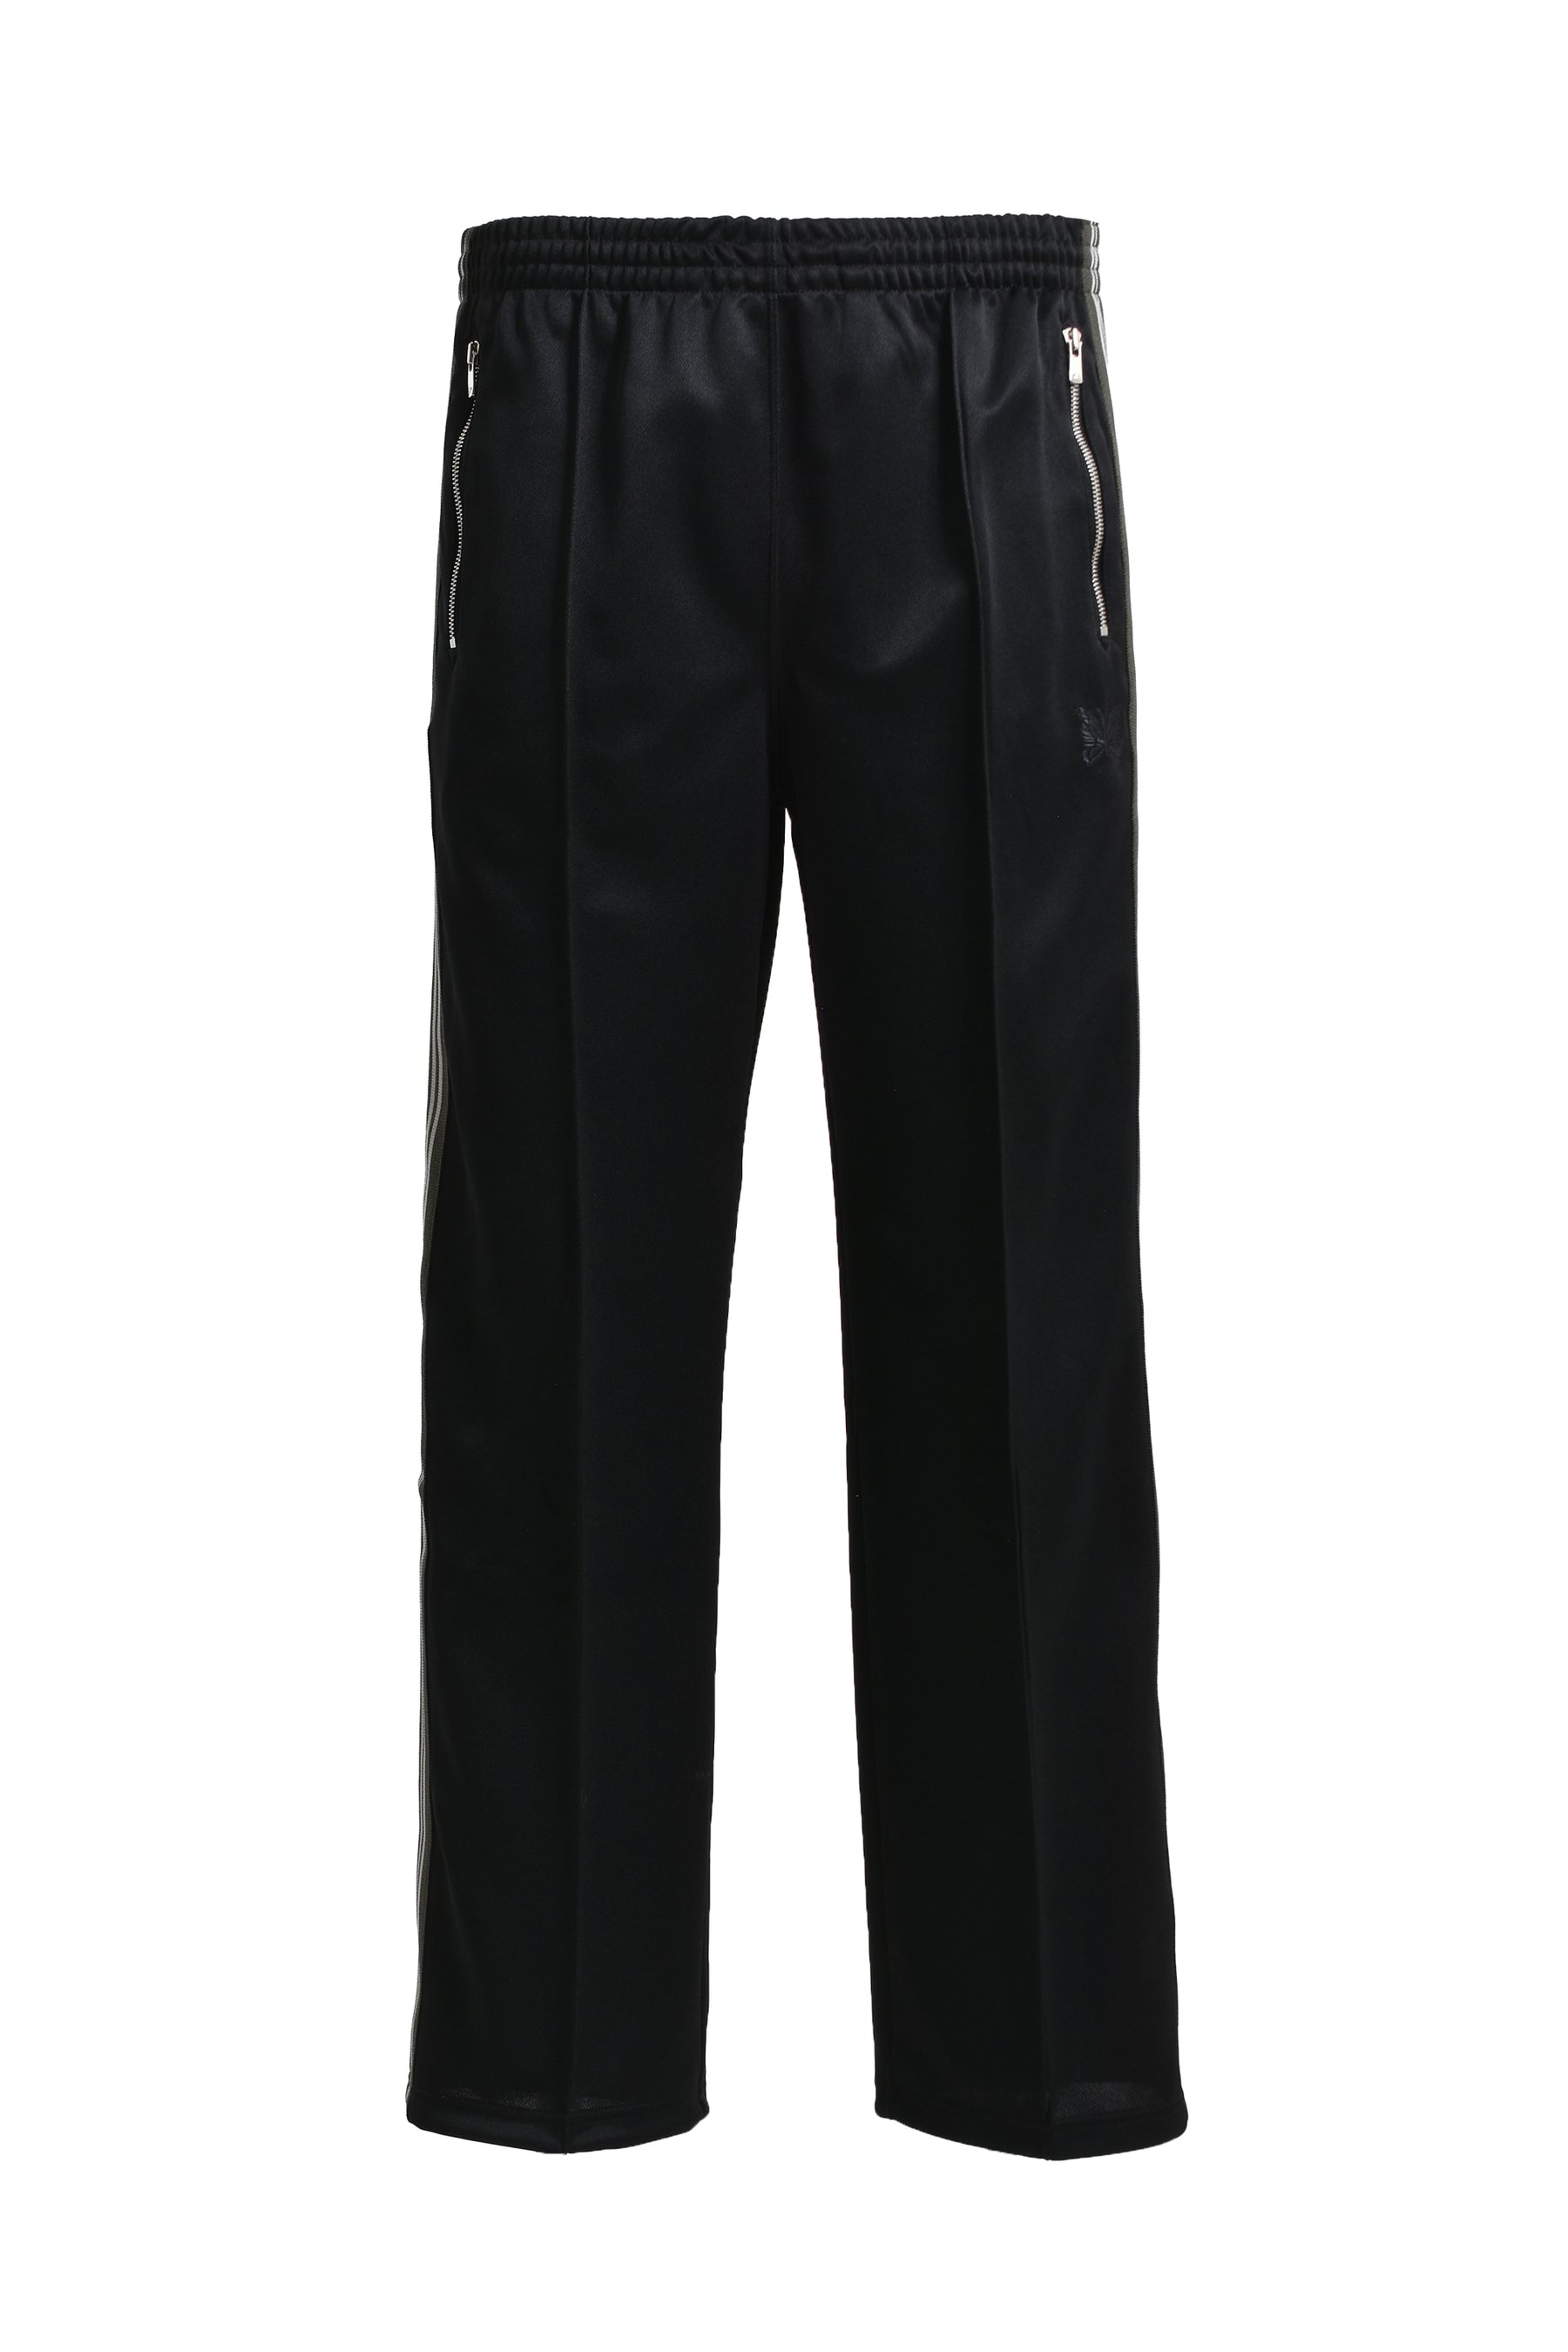 TRACK PANT - POLY SMOOTH (EXCLUSIVE) / BLK CHA BEI